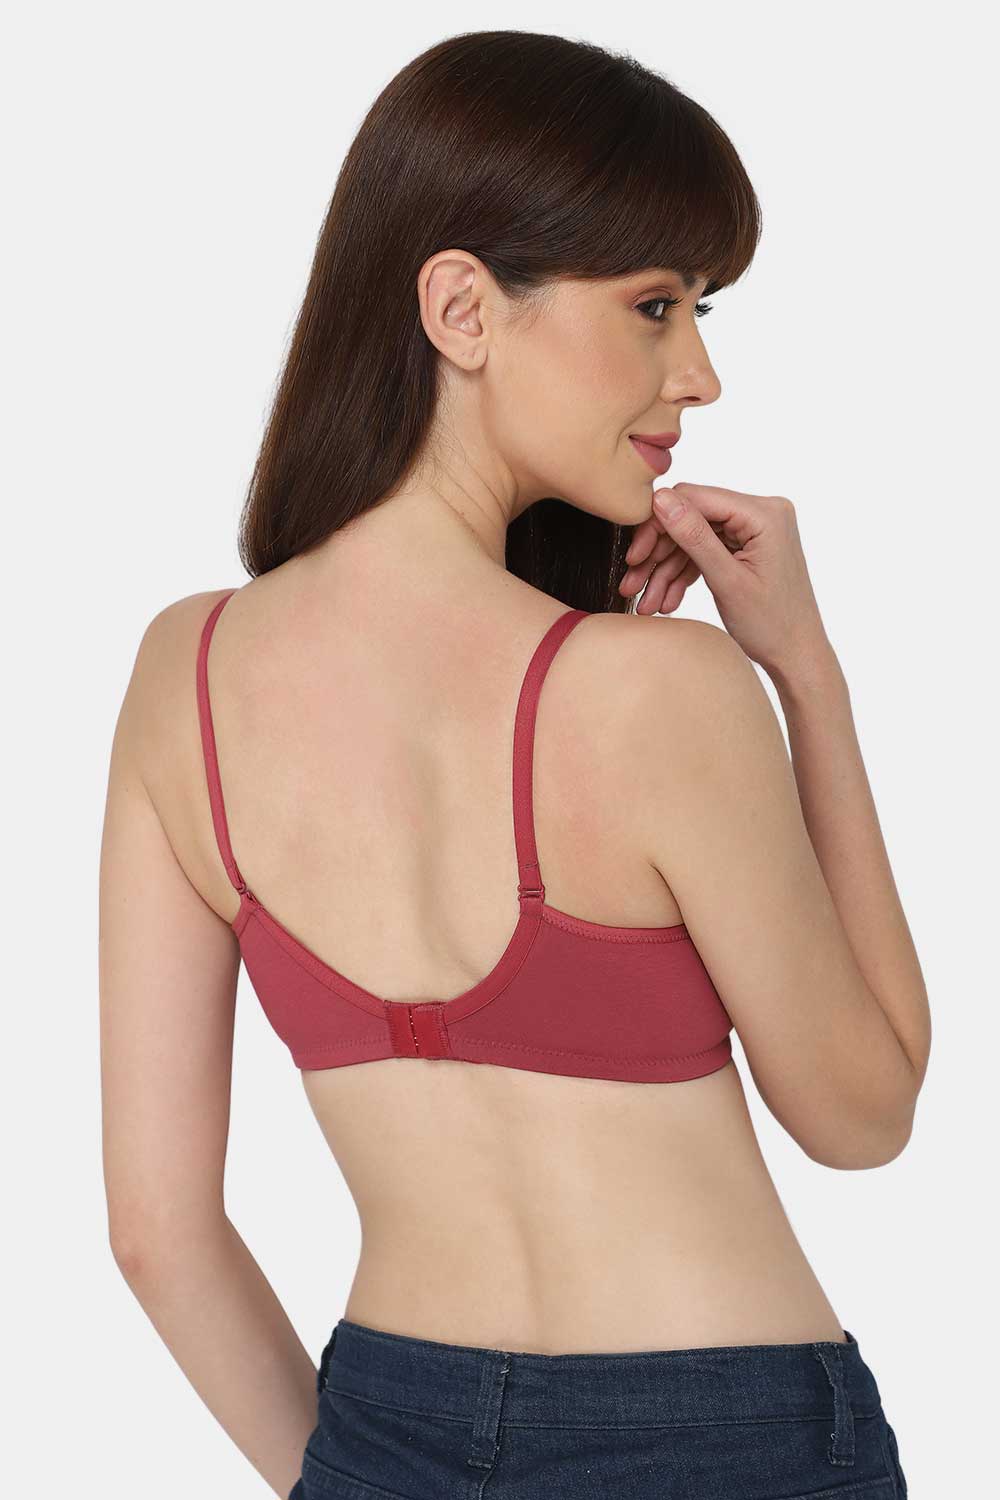 Intimacy Non-Wired Thin & Adjustable T-Shirt Padded Bra- Claretred